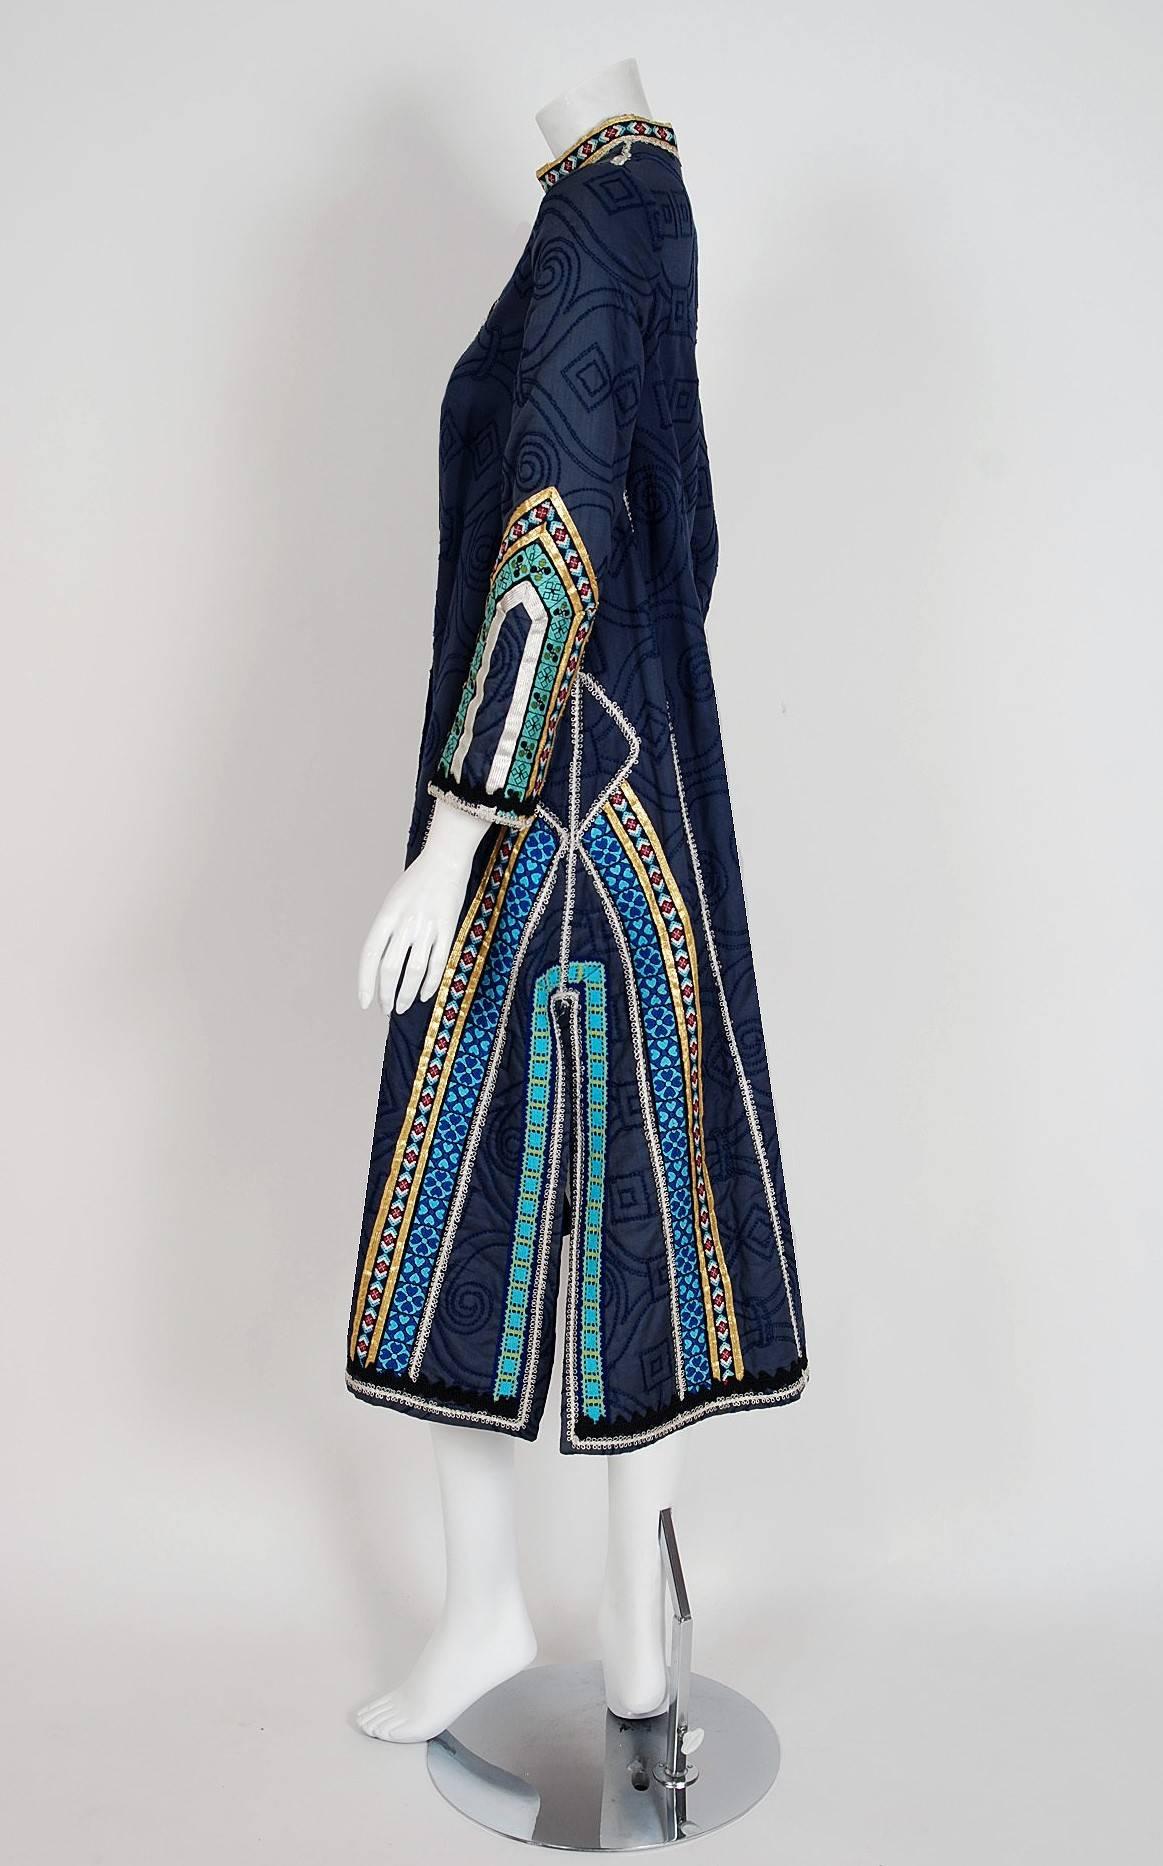 Breathtaking and highly desirable Giorgio Sant'Angelo designer coat from his iconic 1970 collection. He first hit the fashion scene when Diana Vreeland asked him to create clothing for a desert location shoot that starred Verushka in 1968. This